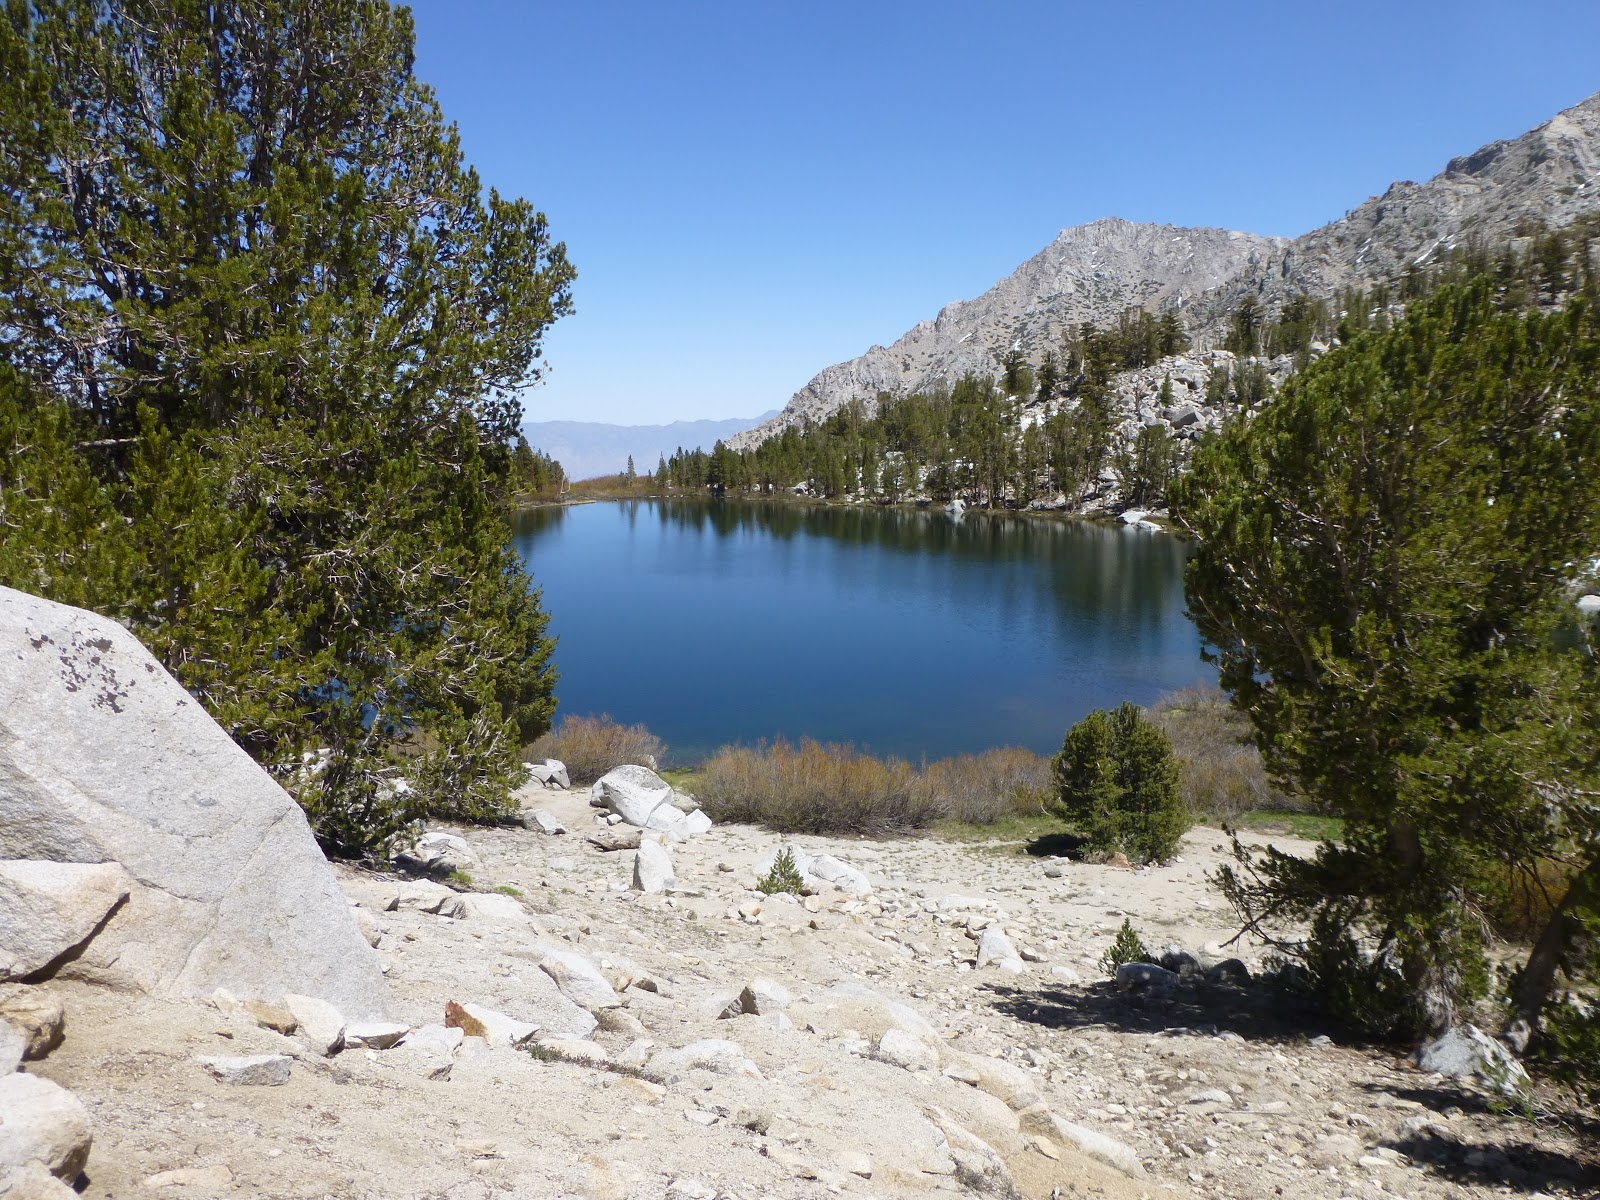 Gilbert Lake, from the way down towards Onion Valley